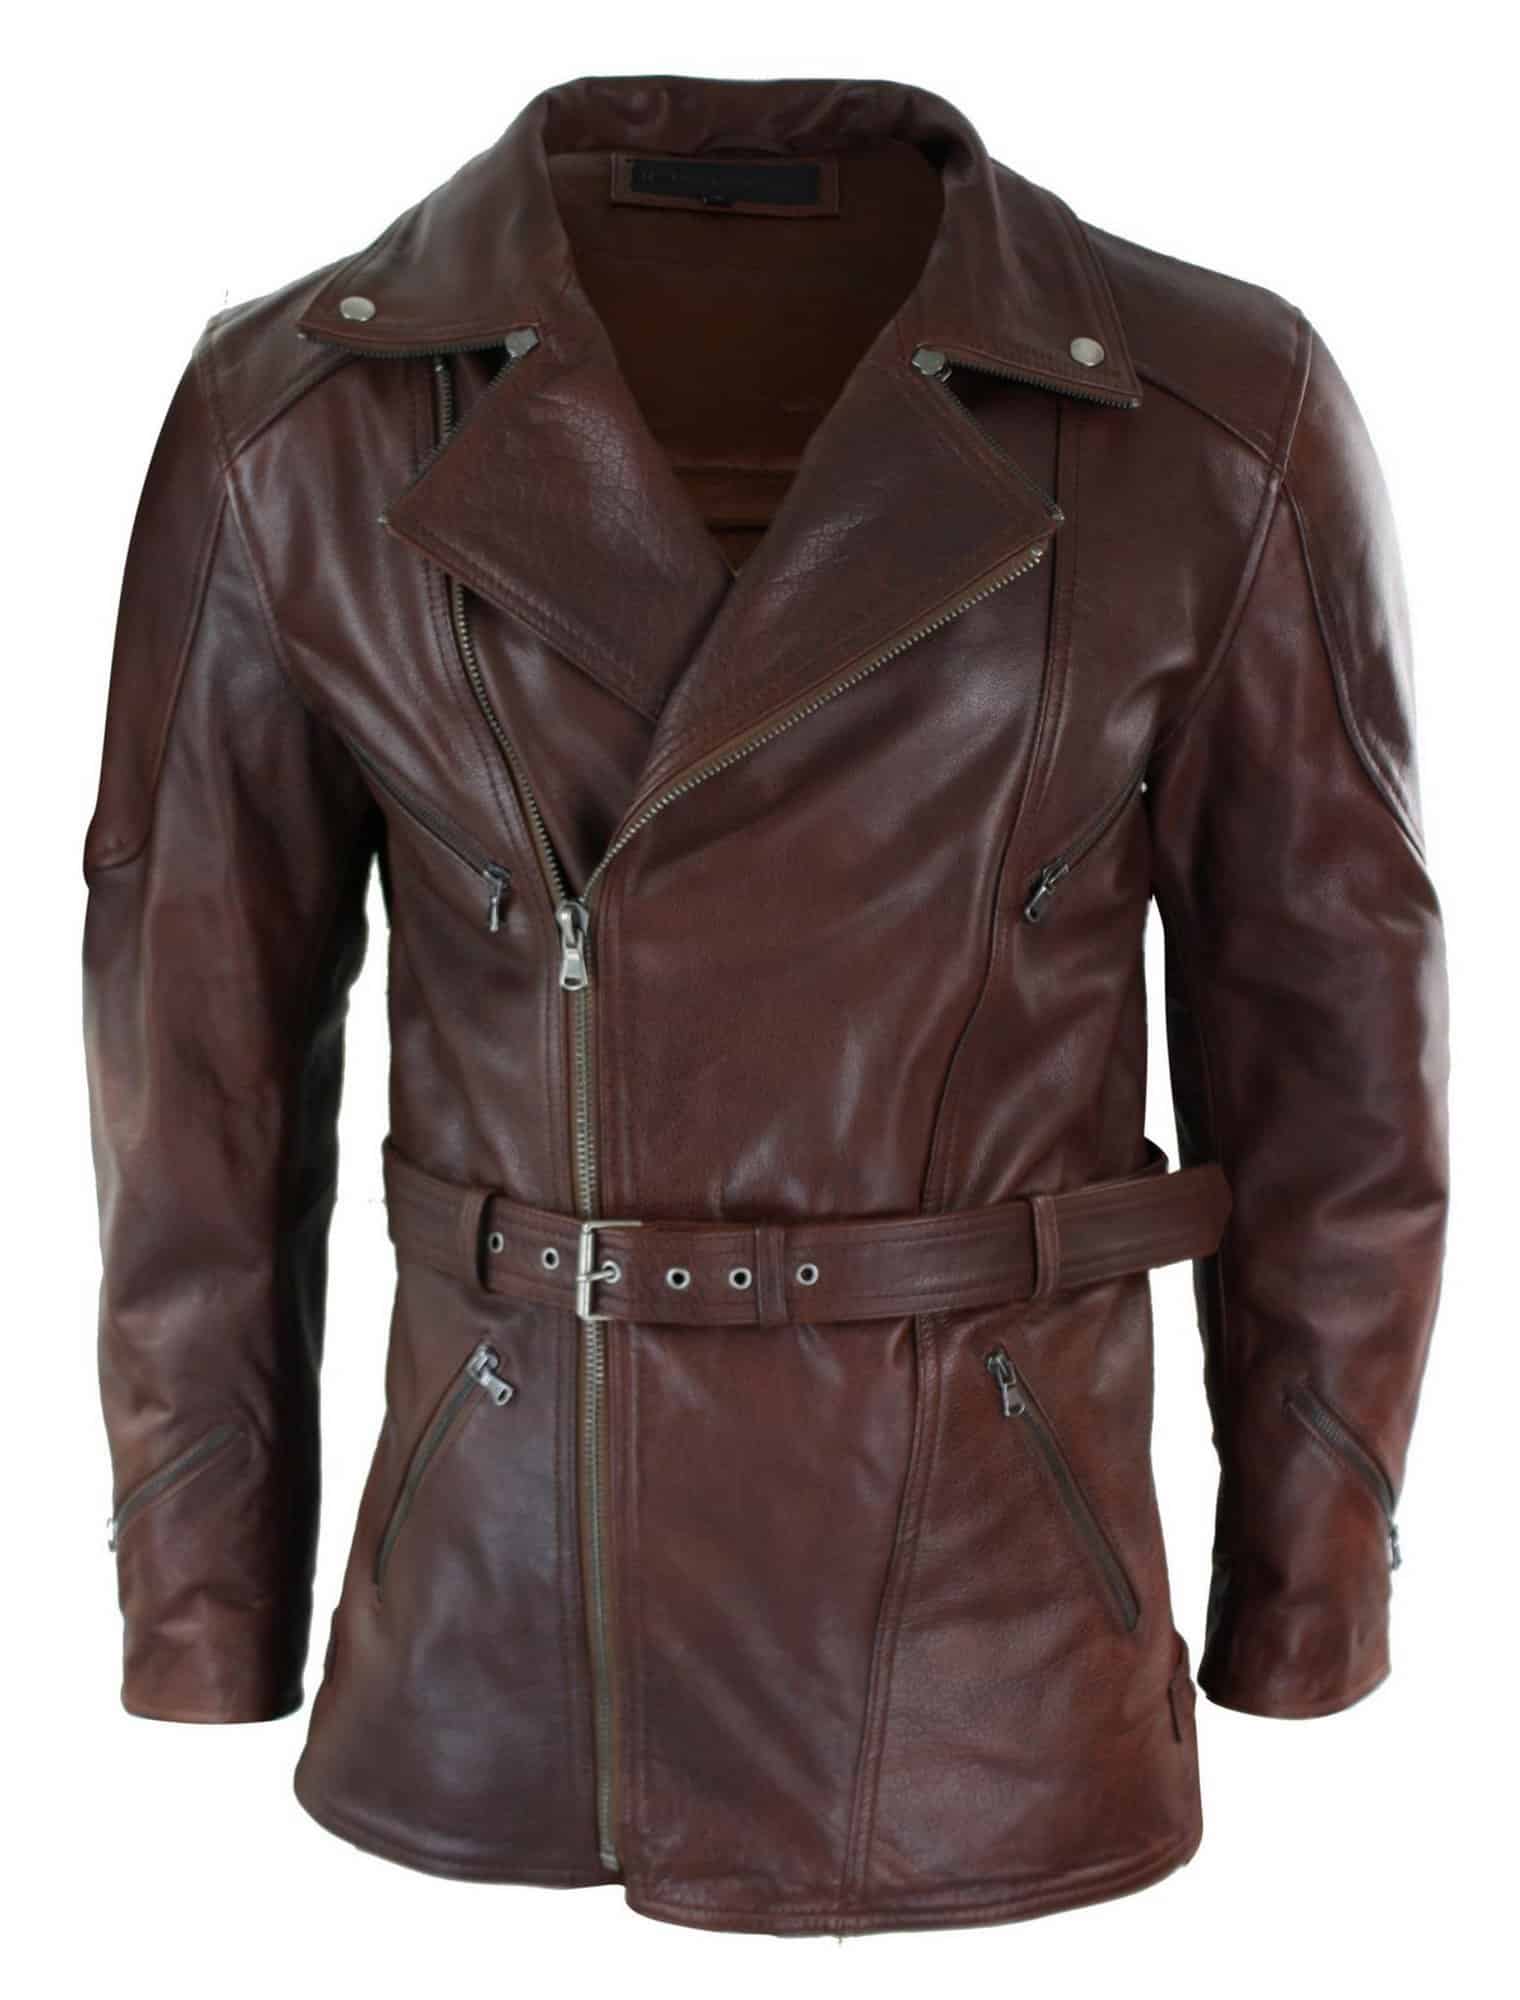 Mens Cross Zip Belted Timber Brown 3/4 Motorcycle Biker Long Leather Jacket CE Armour